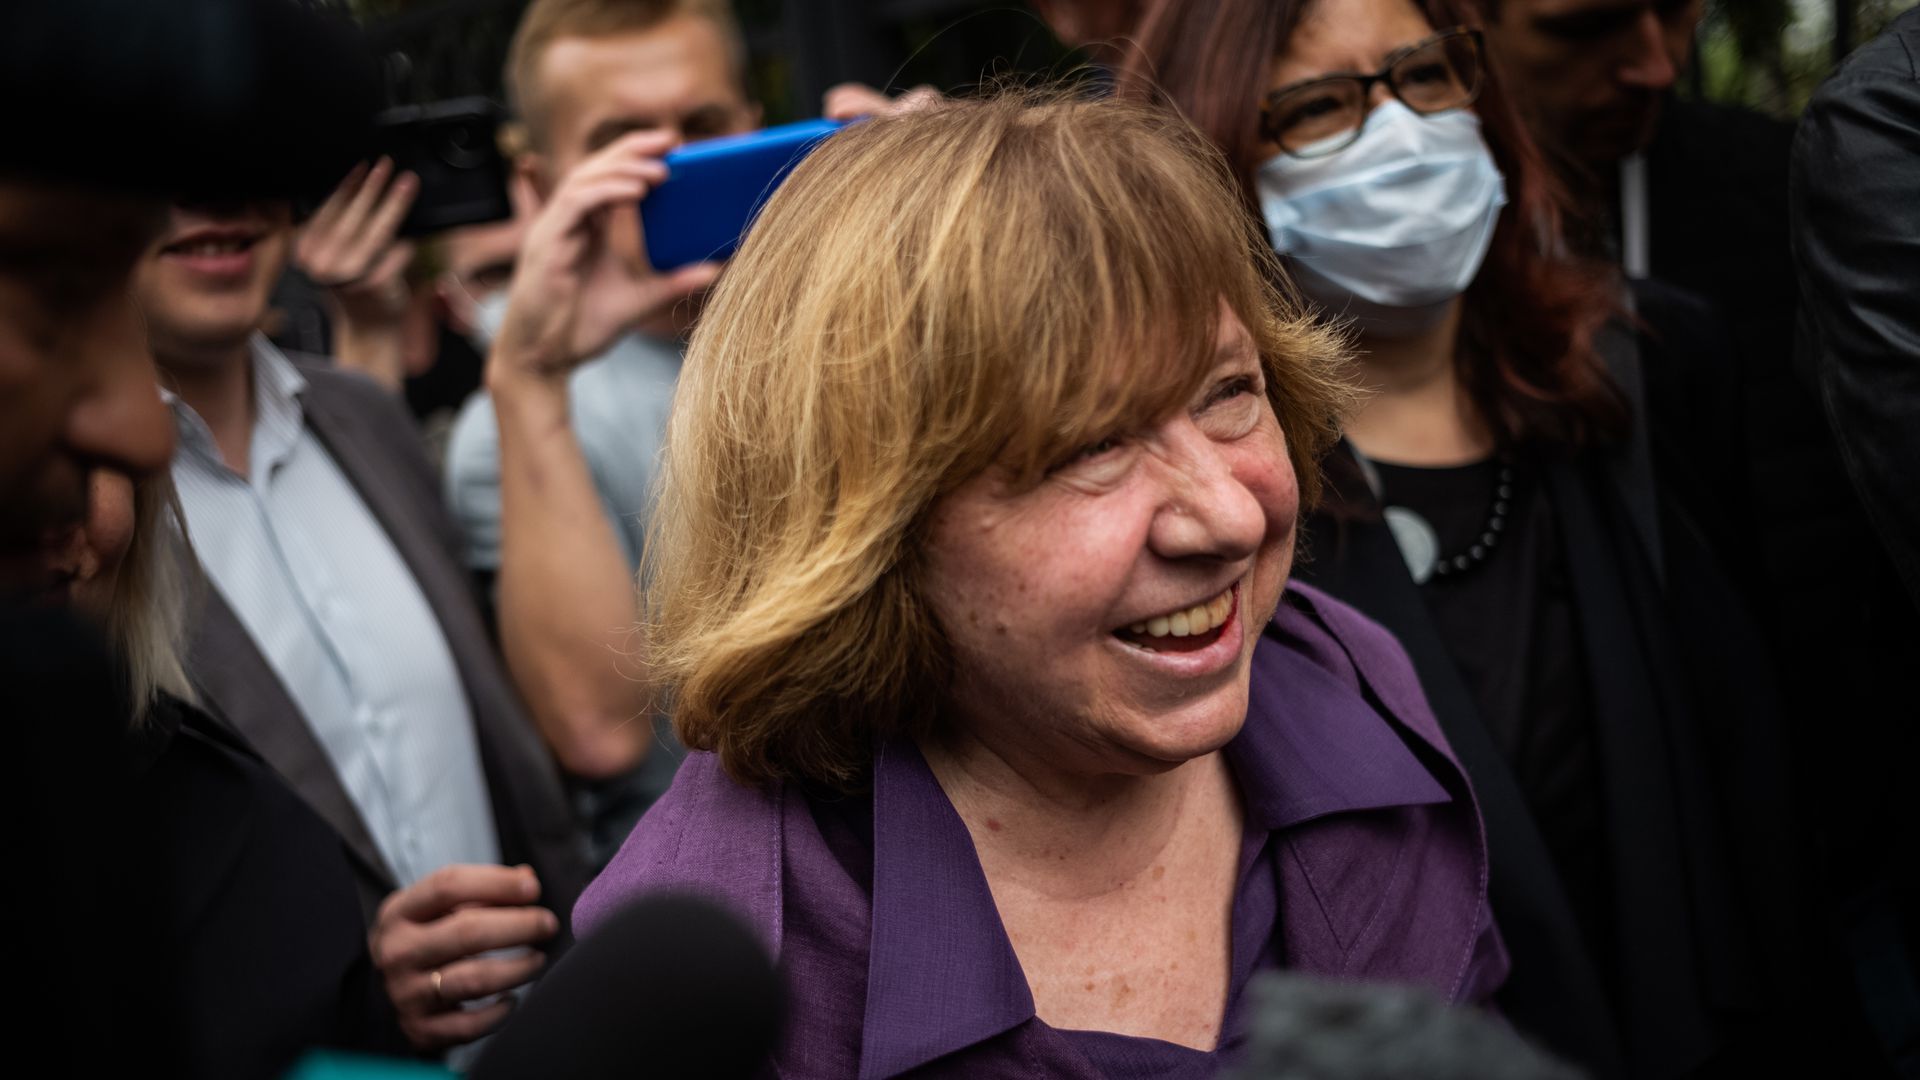 Svetlana Alexievich arrives for questioning by investigators on Aug. 26.